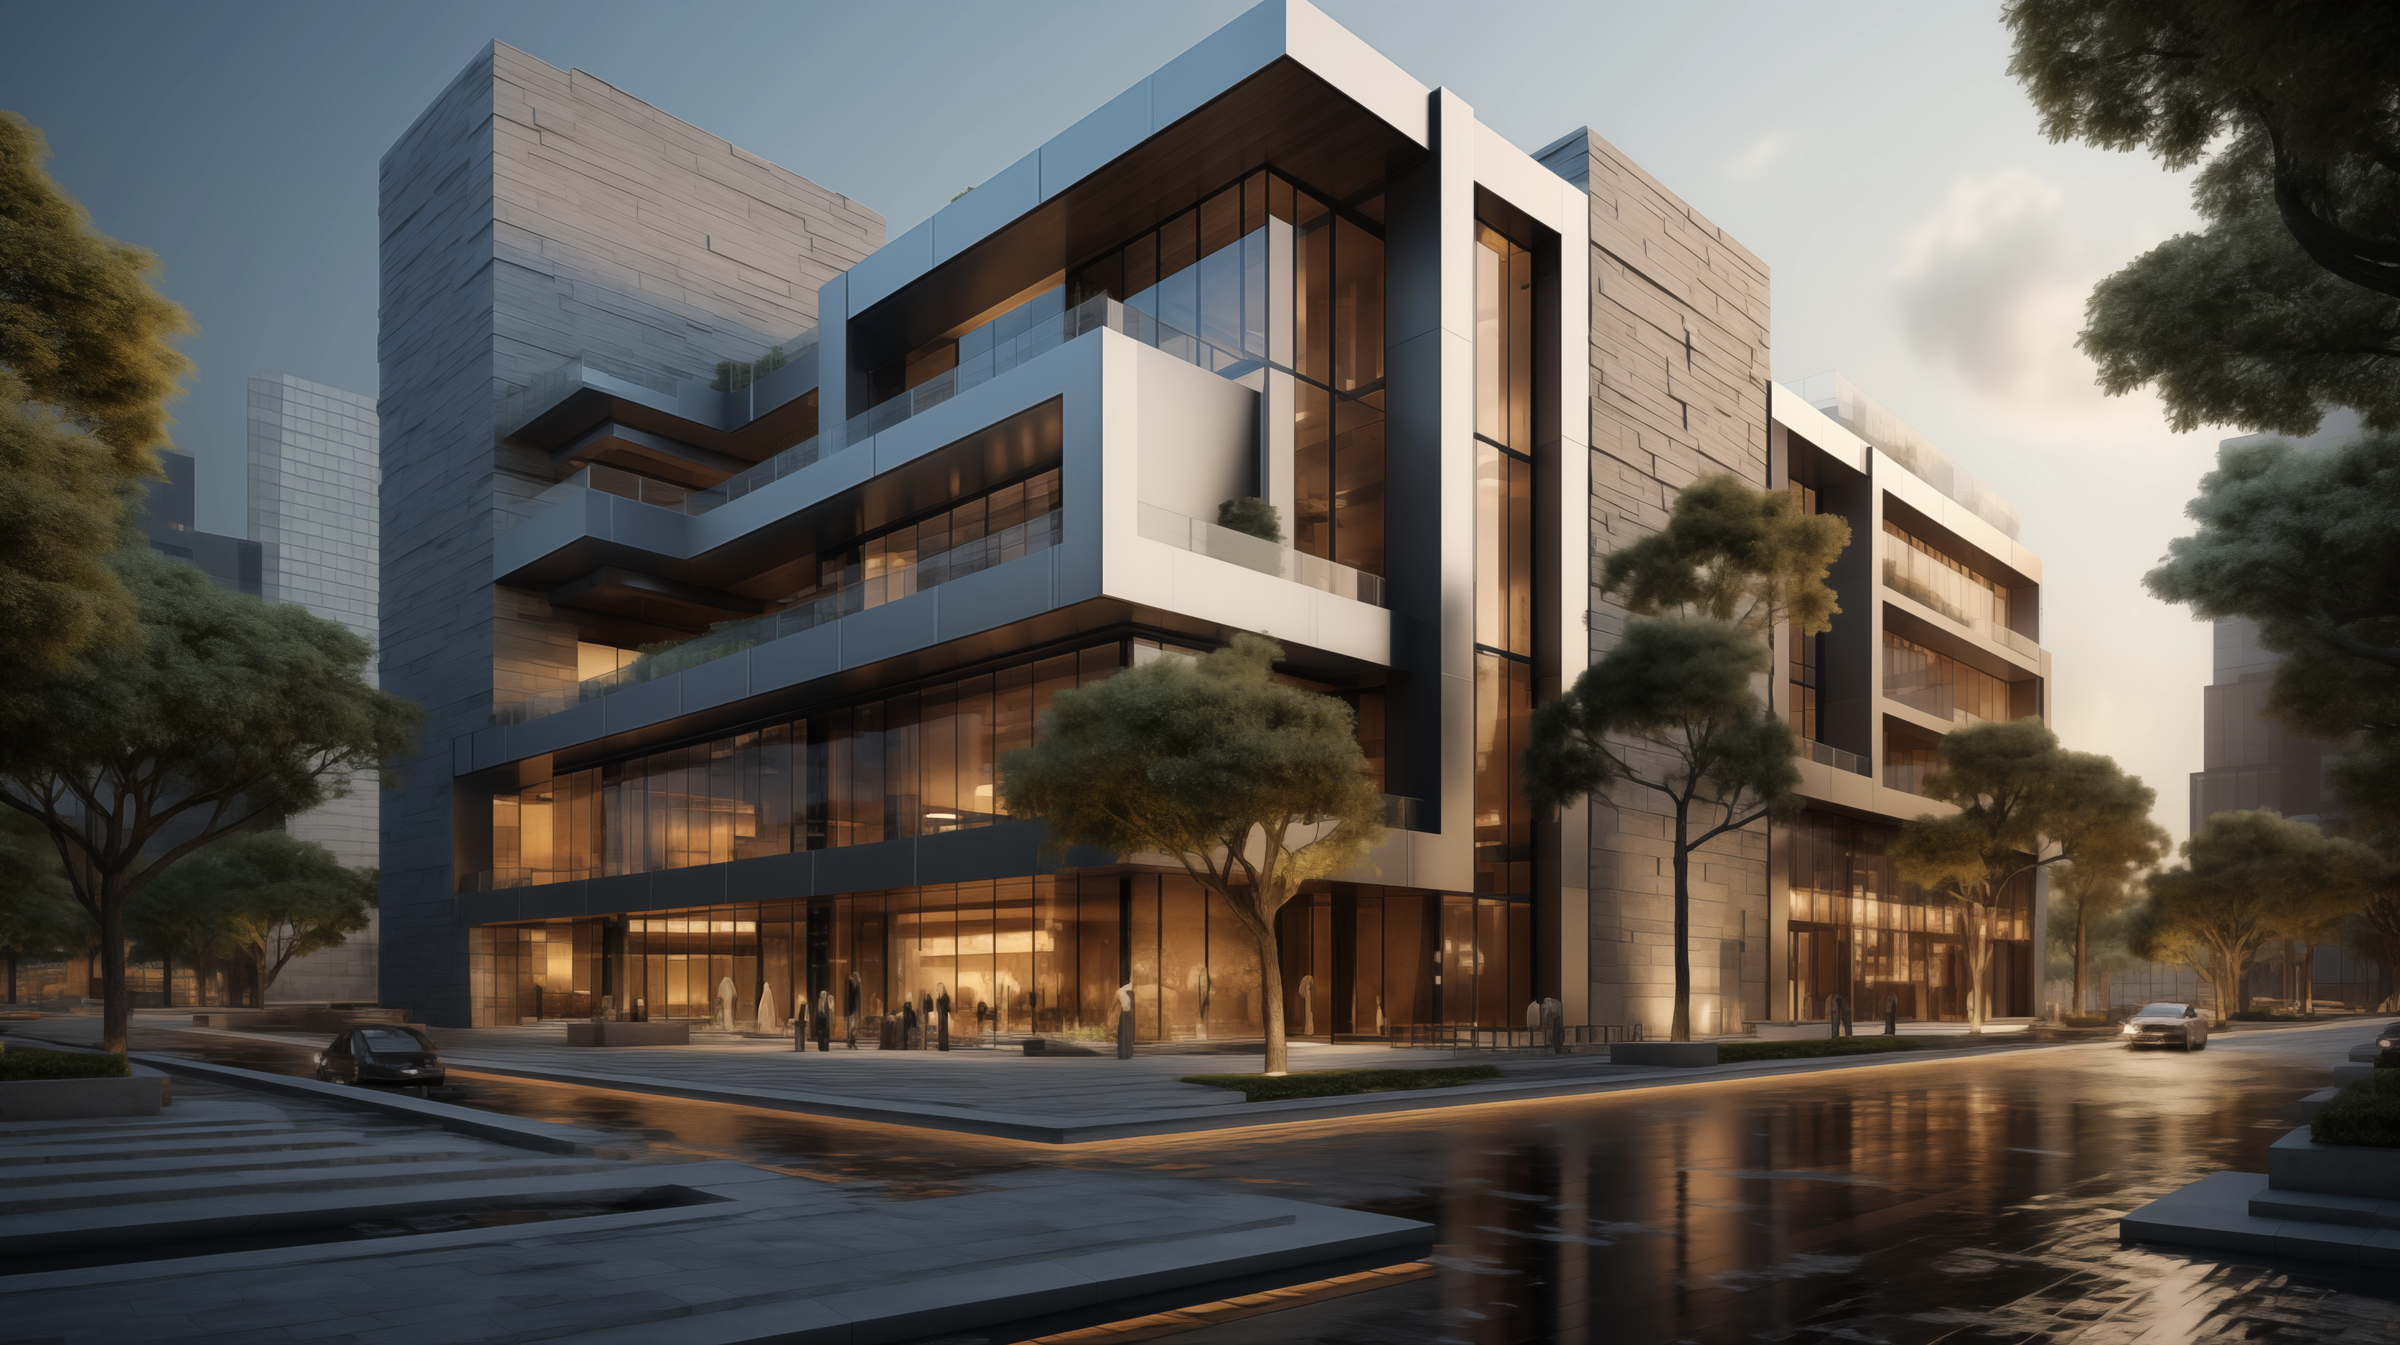 Modern office building facade featuring a variety of textured stone finishes, including bush-hammered, flamed, and naturally split surfaces. The building is set in a contemporary urban environment with trees and a sleek, glass exterior.